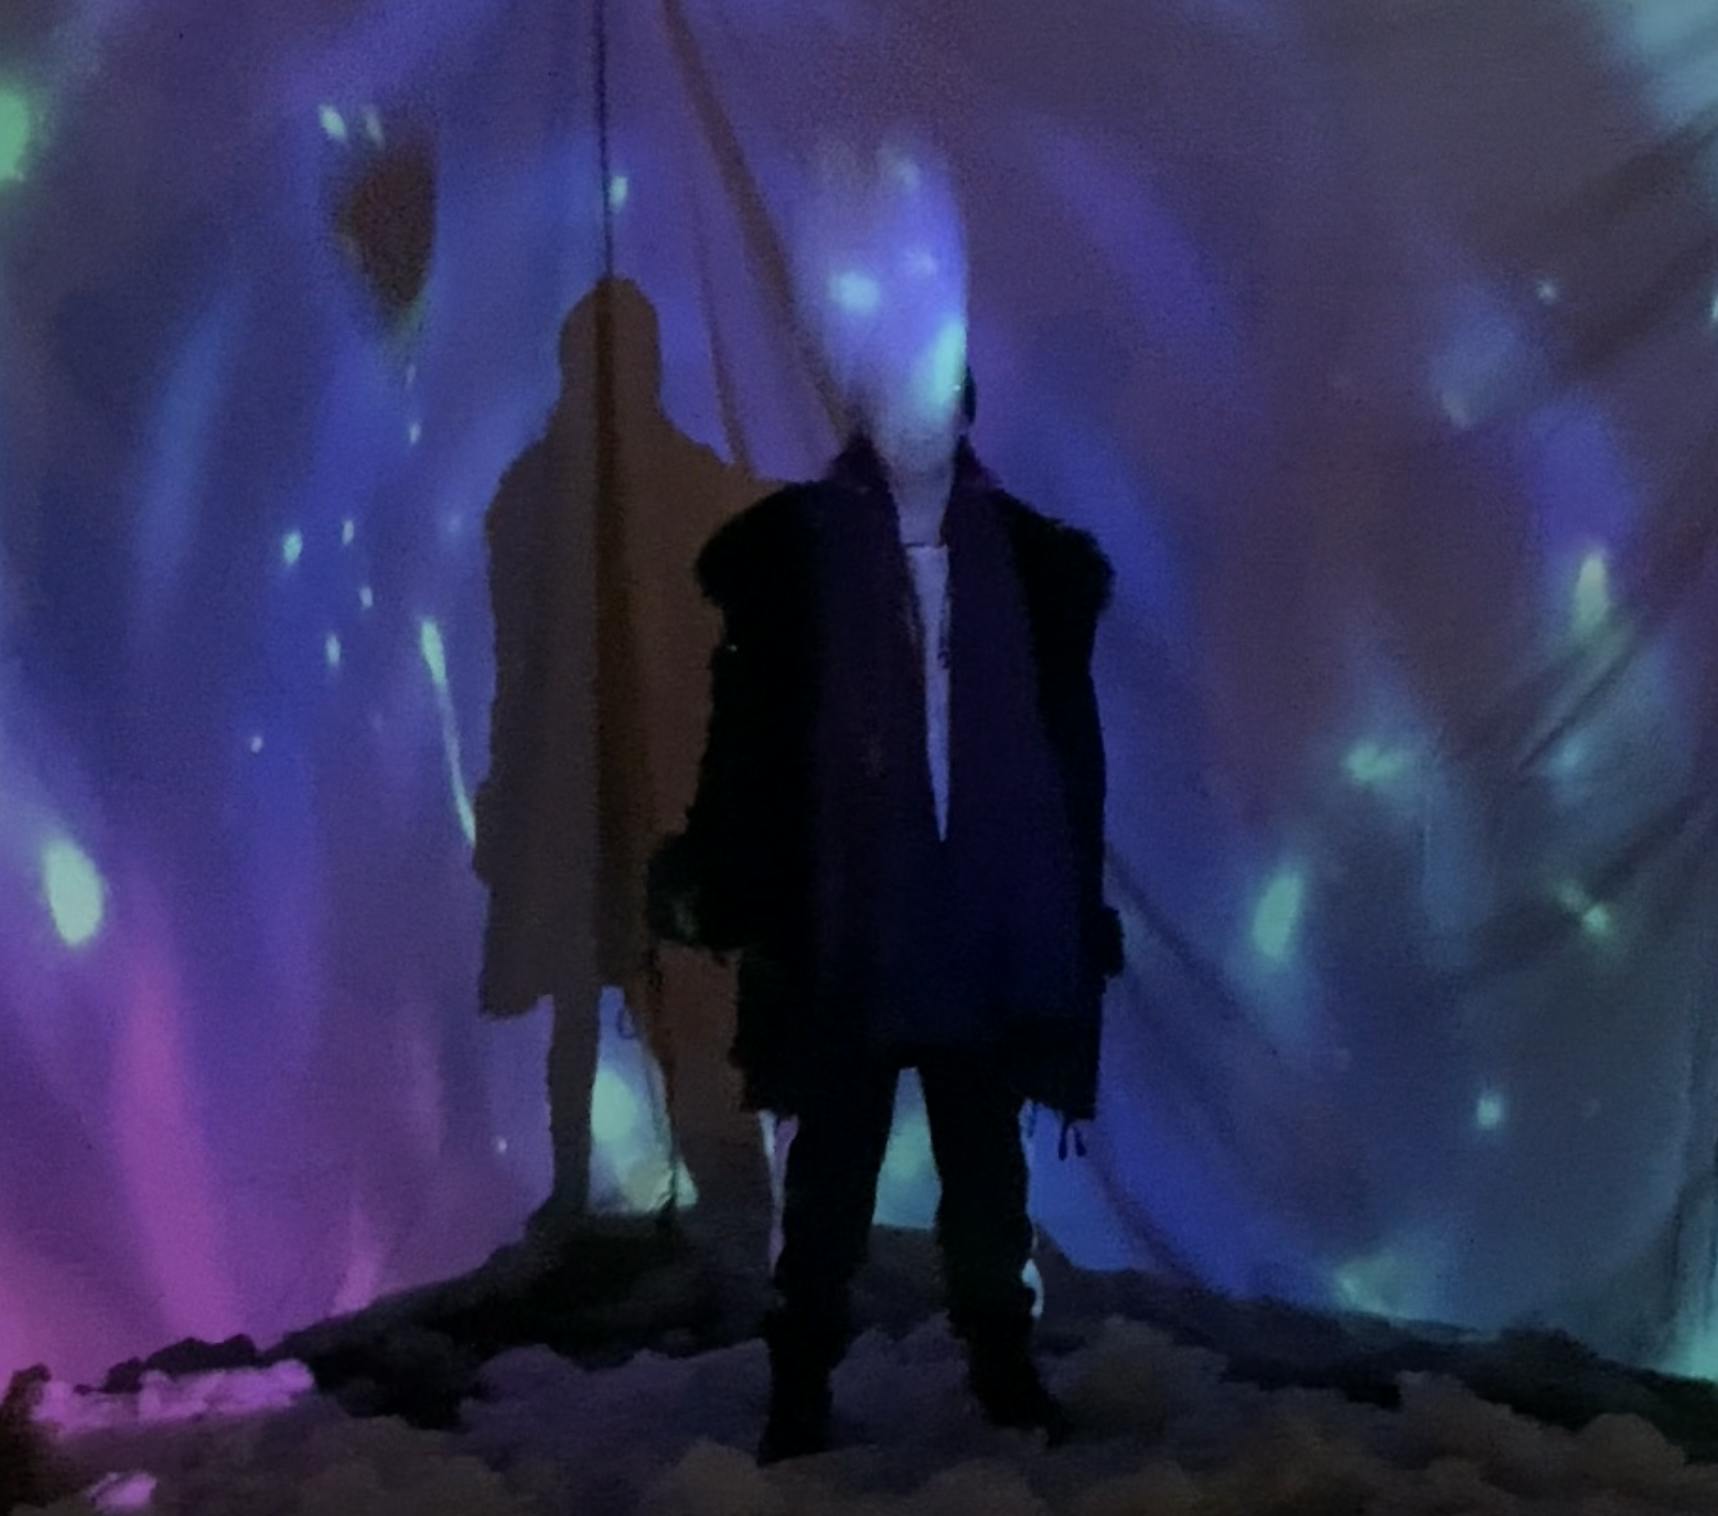 image of someone in front of an abstract projection map